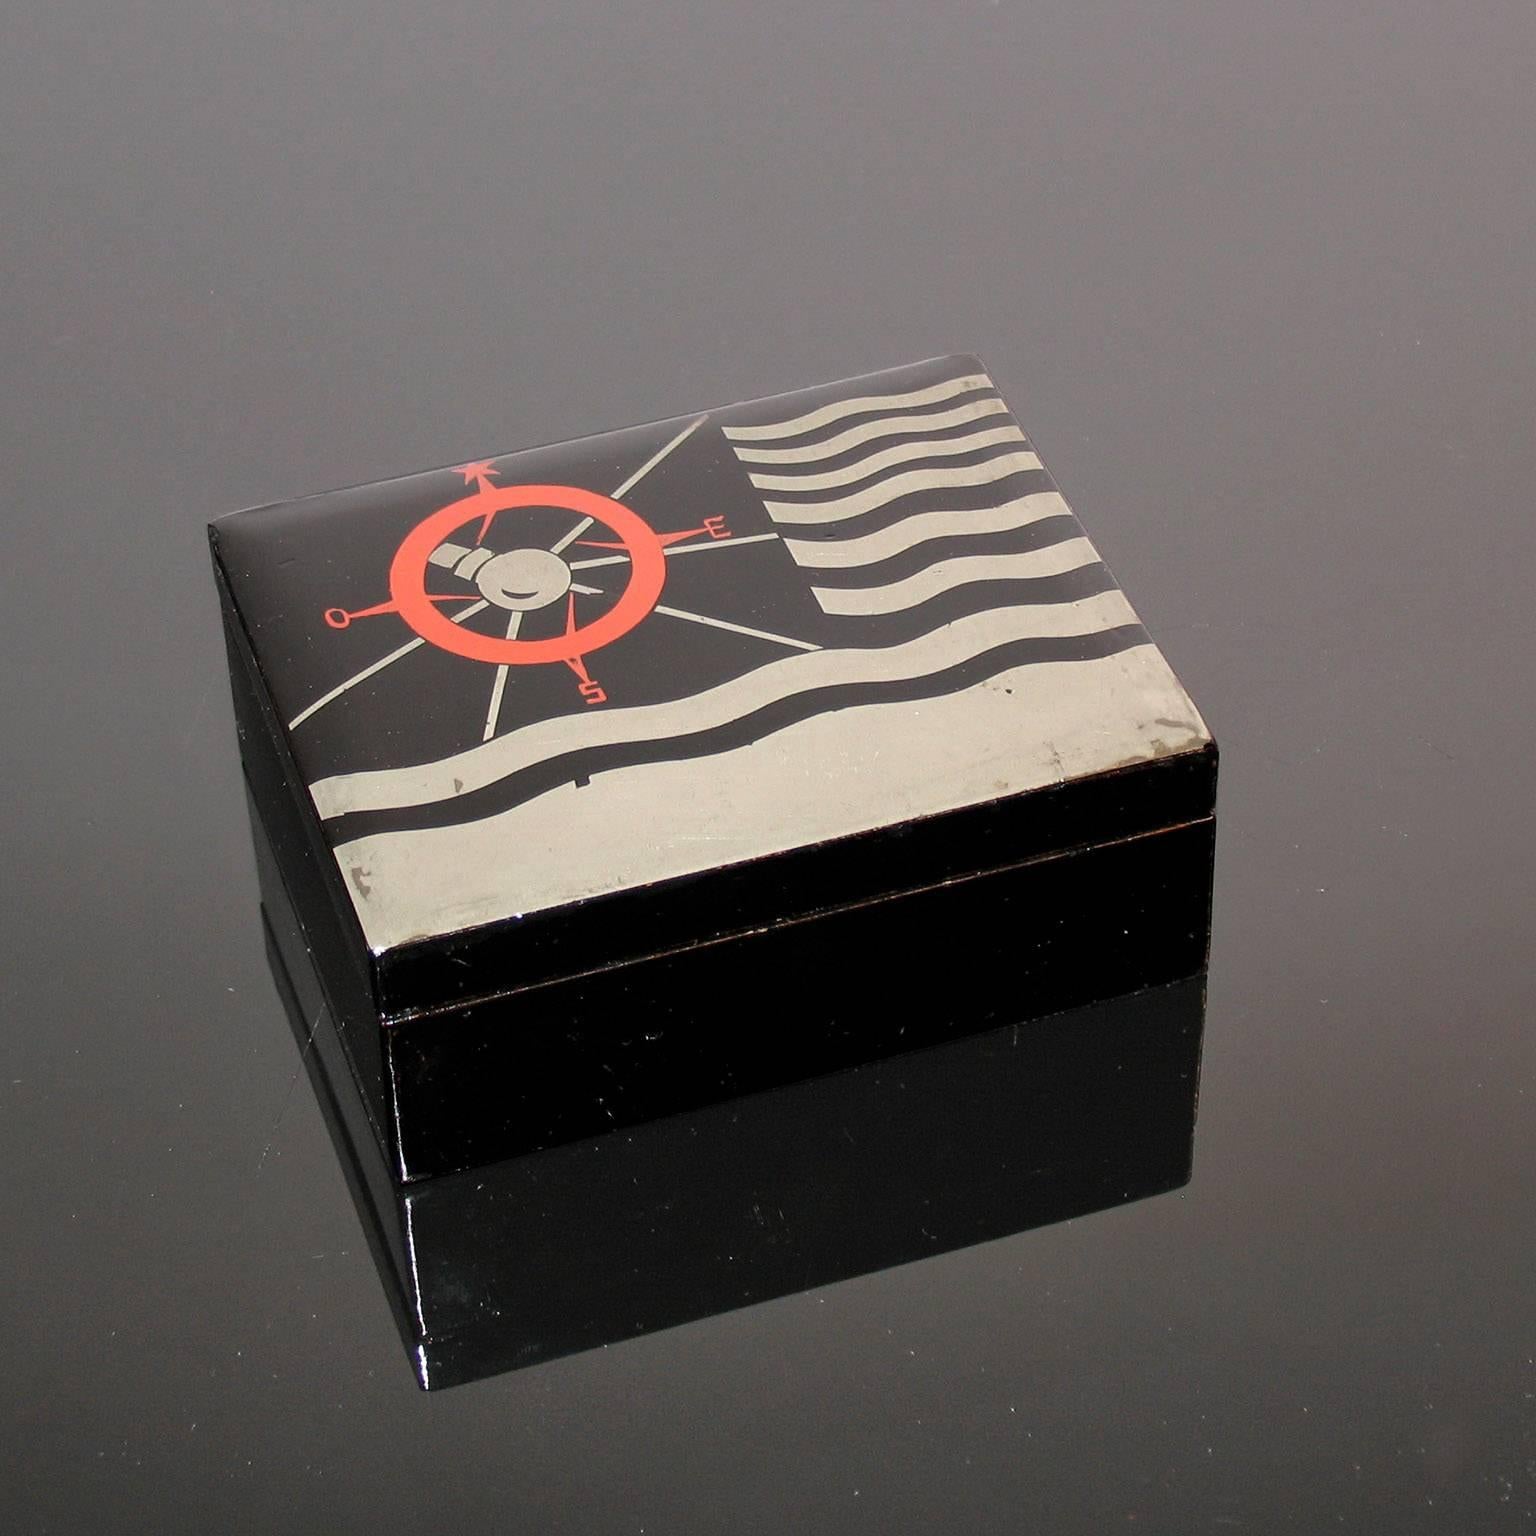 Art Deco lacquered decorative jewelry box.
Art Deco box, black lacquer background, decorated with waved silver lines and wind rose in red. Inscribed inside the lid 